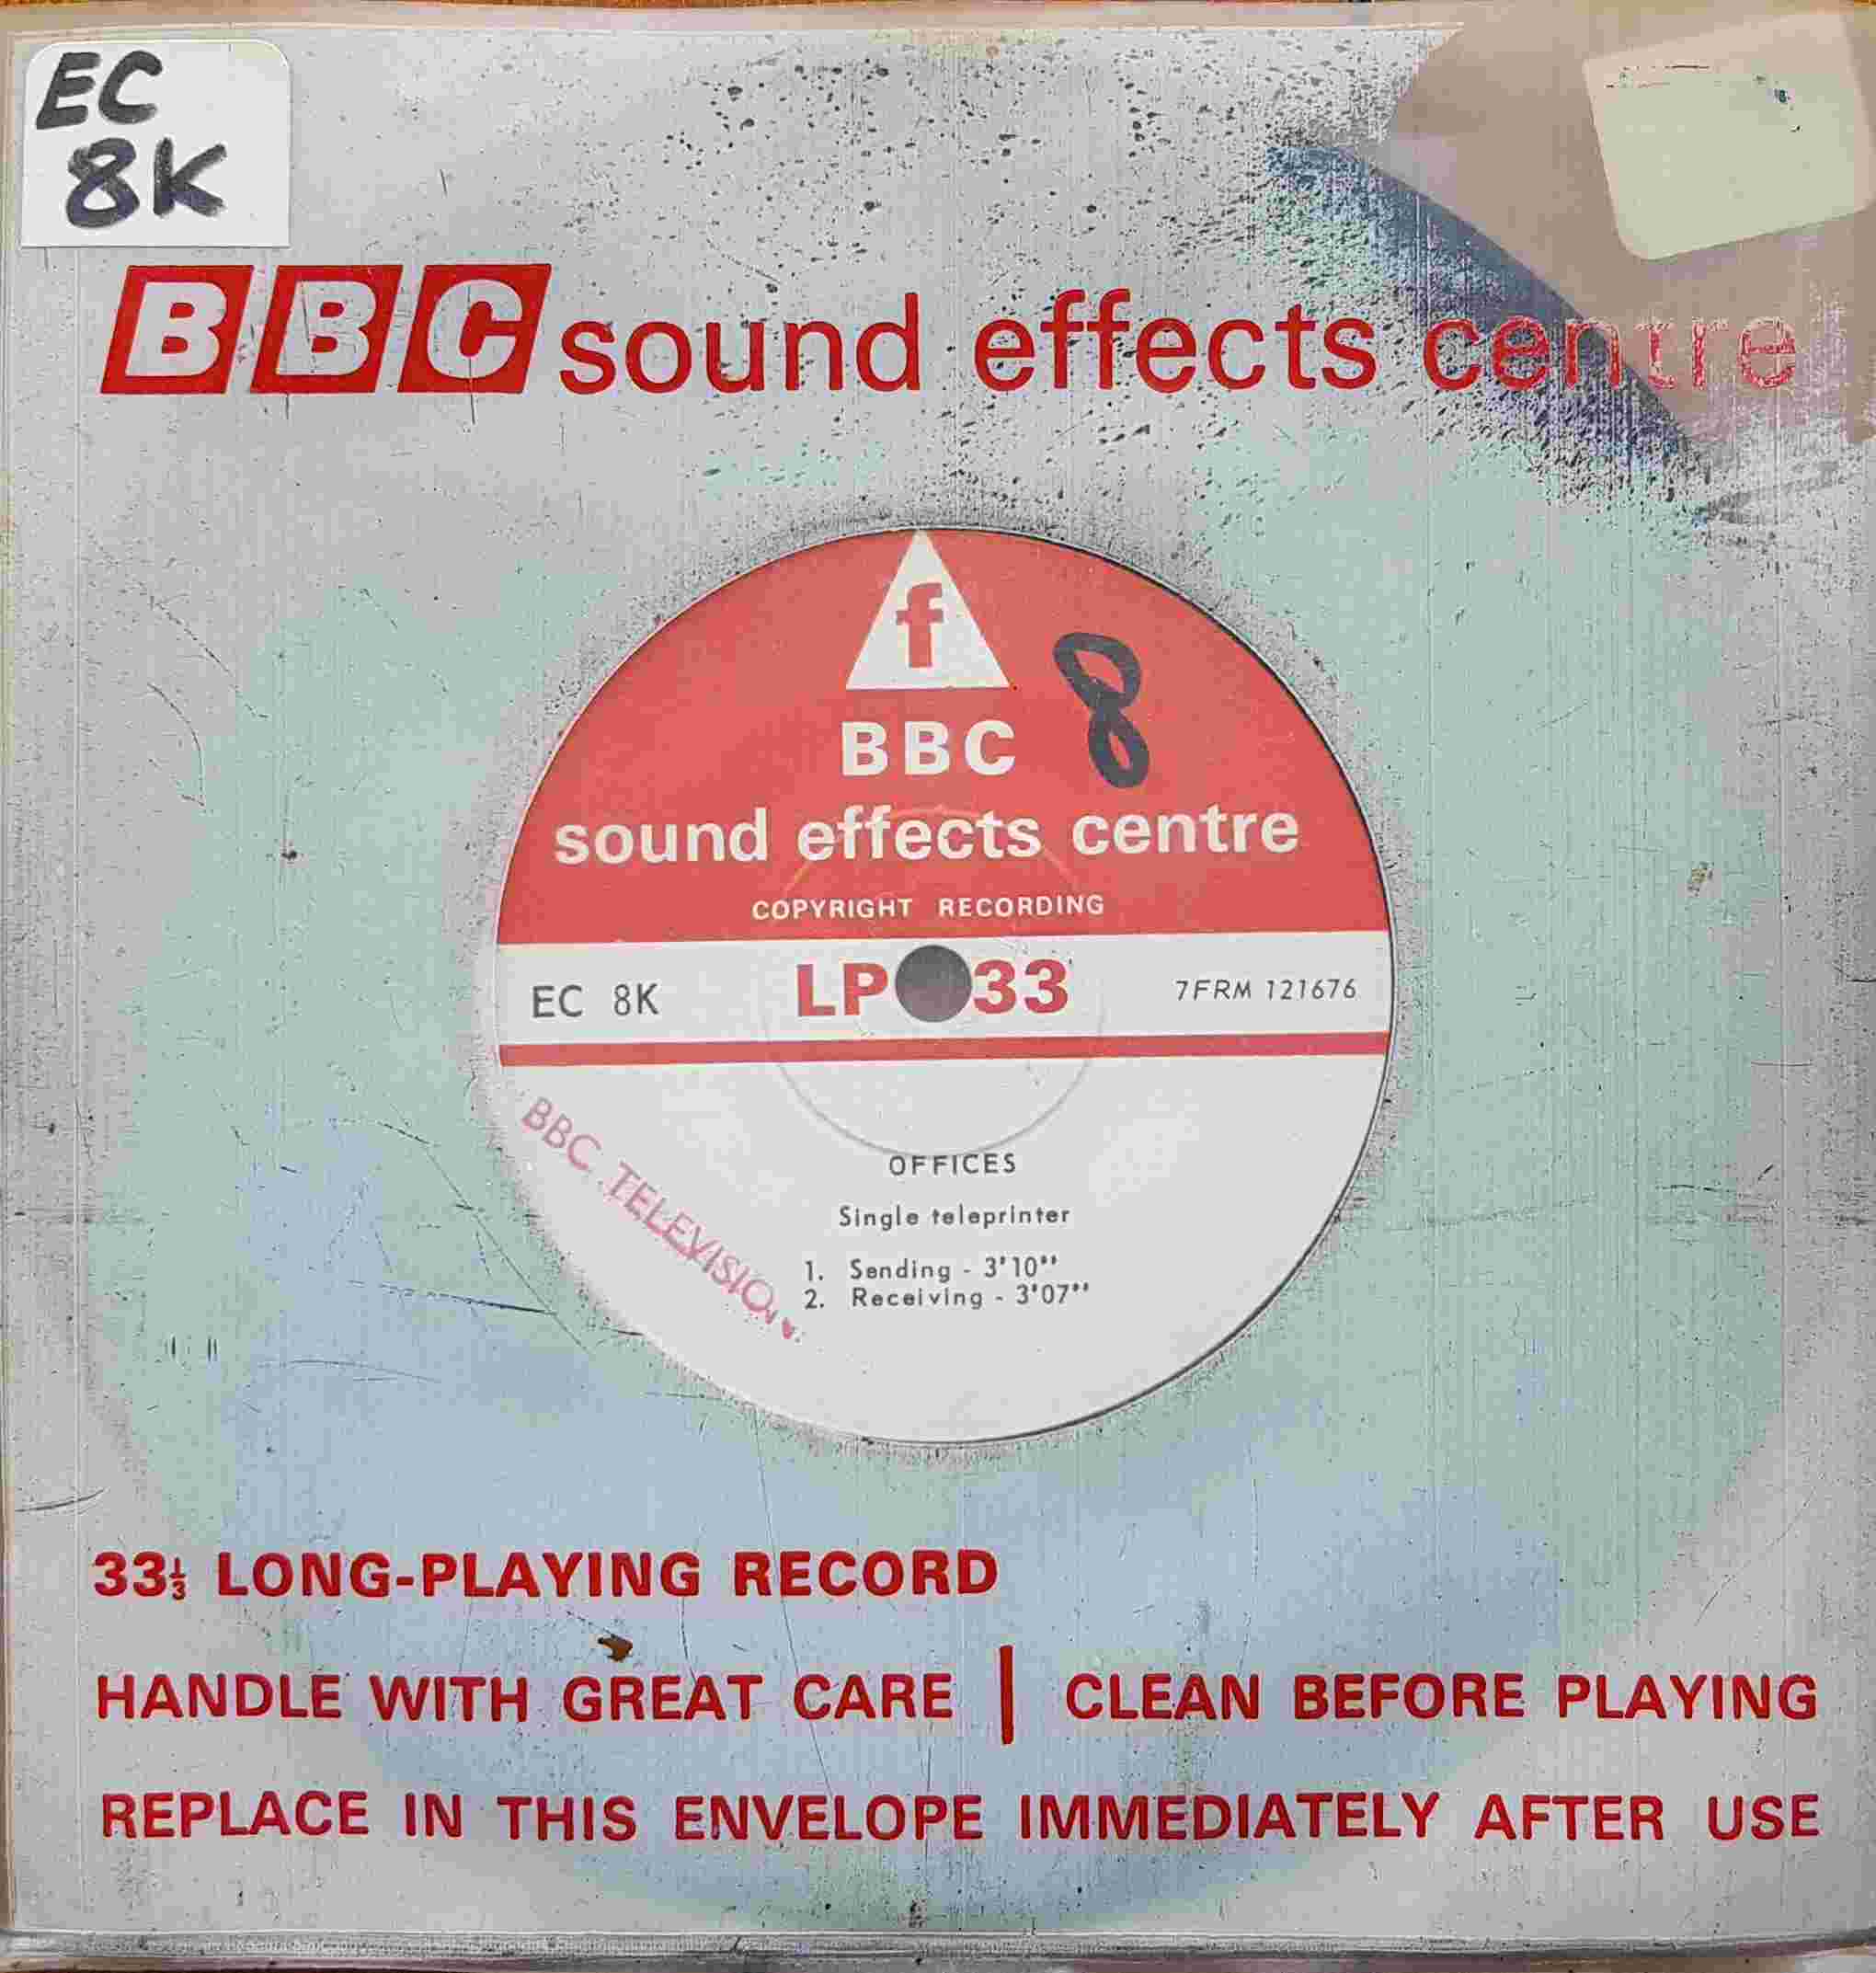 Picture of EC 8K Offices by artist Not registered from the BBC records and Tapes library